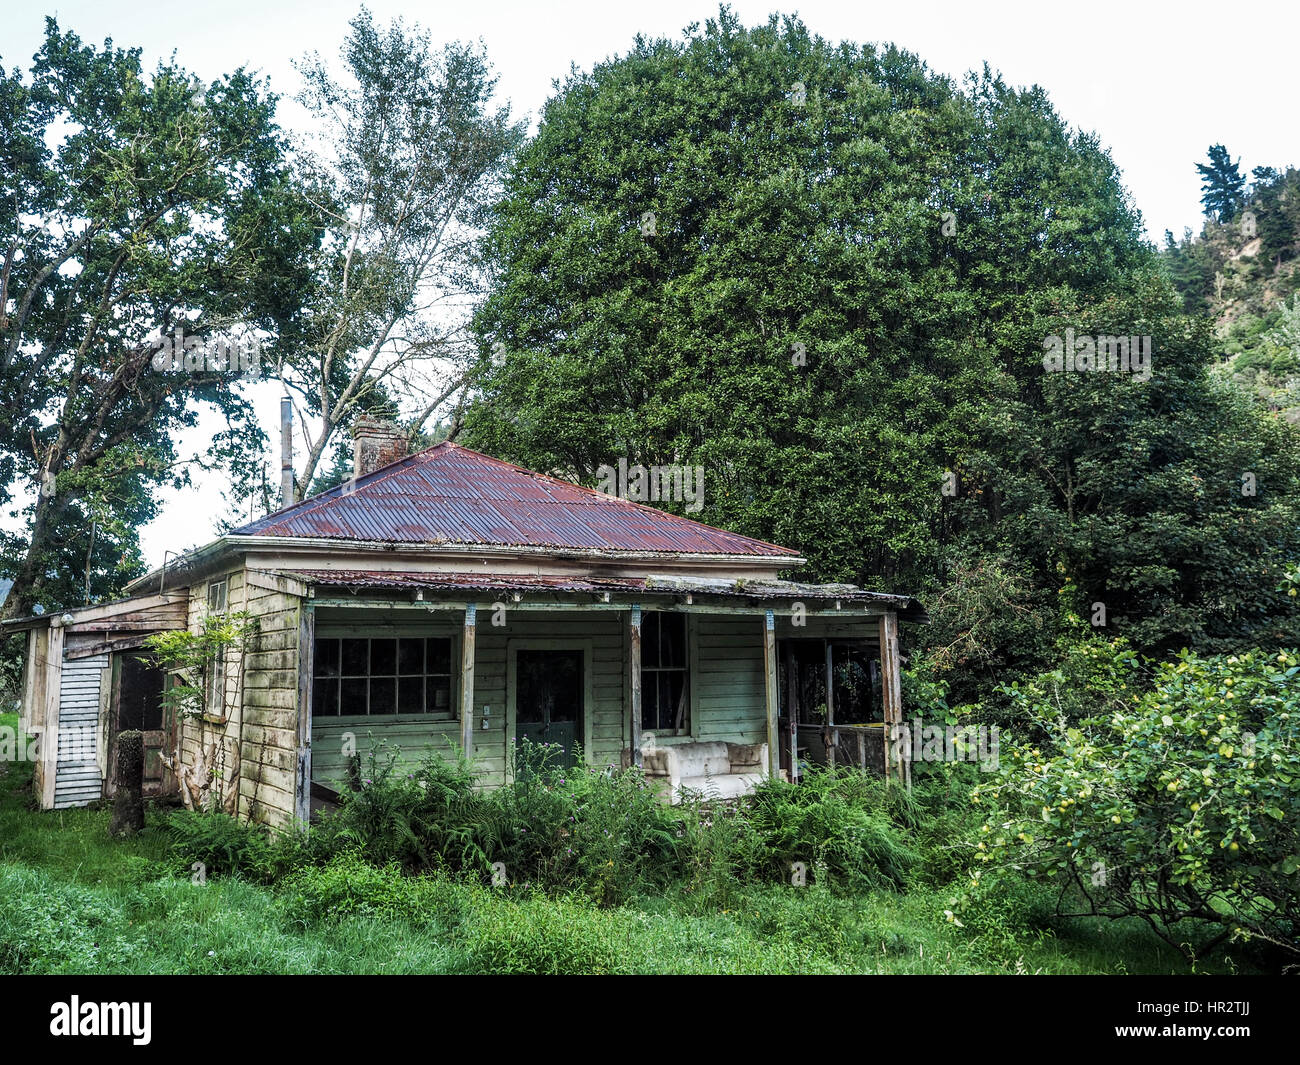 Abandoned house, Makino Valley, New Zealand. Home of 1920s pioneer settler a farm hewed out of hill country forests,  now regenerating shrub lands. Stock Photo